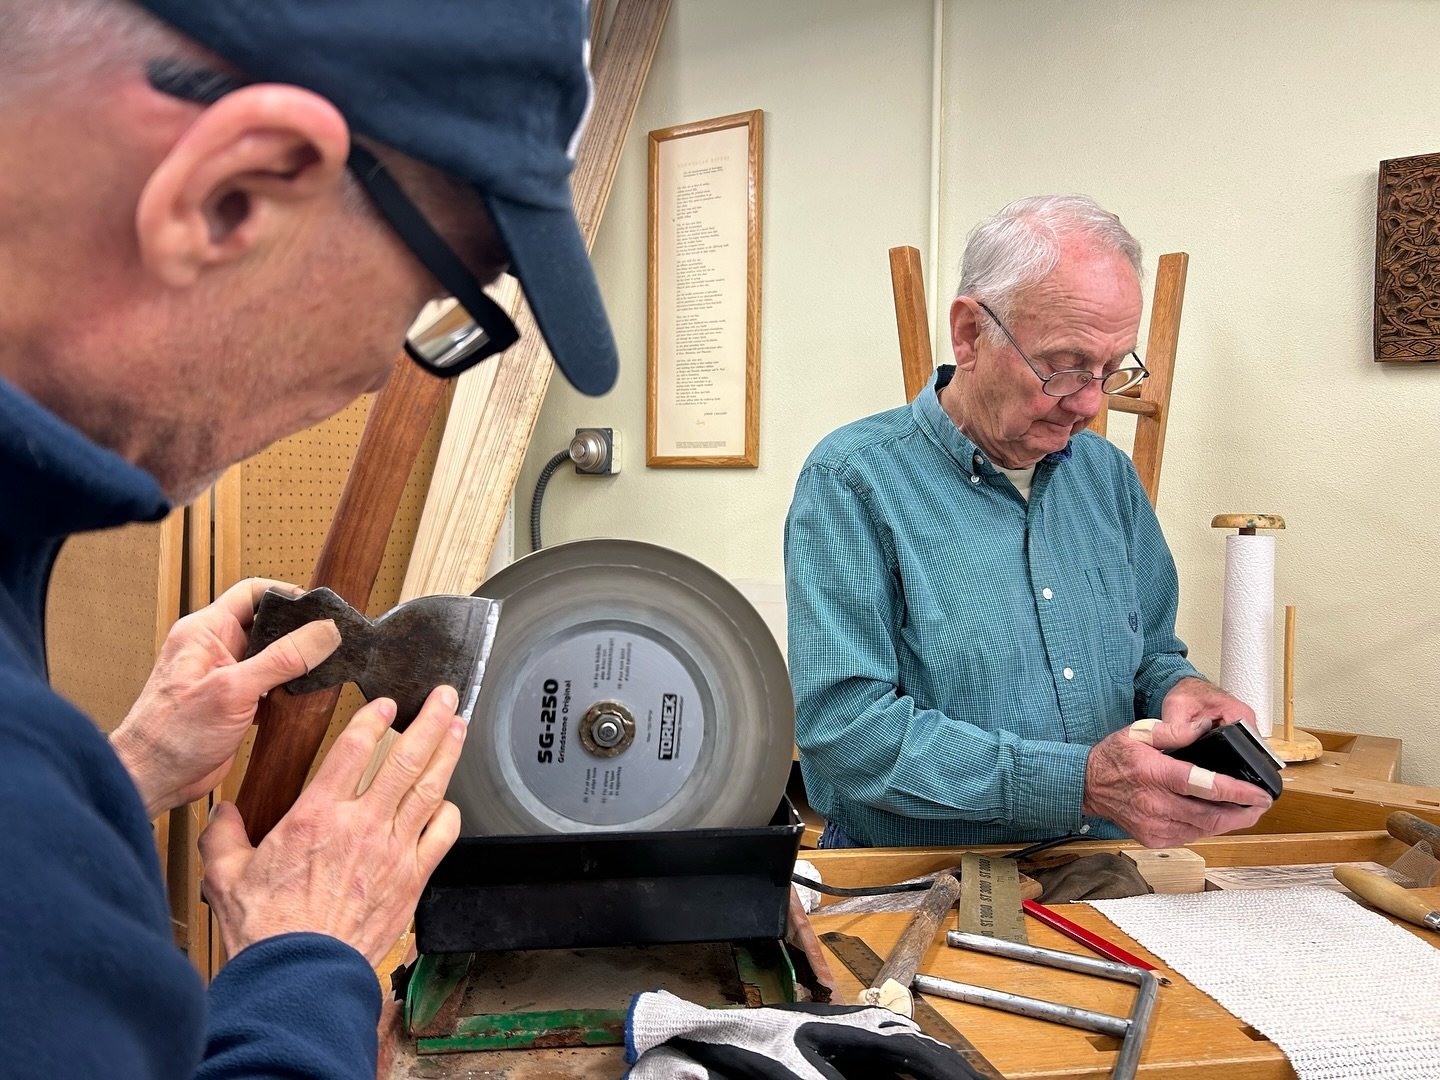 More glimpses into my kuksa carving course last weekend at @vesterheim.museum 

Here you can see Kurt and Roger tuning up their knives and axes with the @tormek_sharpening 

It won&rsquo;t be long now. They&rsquo;ll have properly sharpened and on the